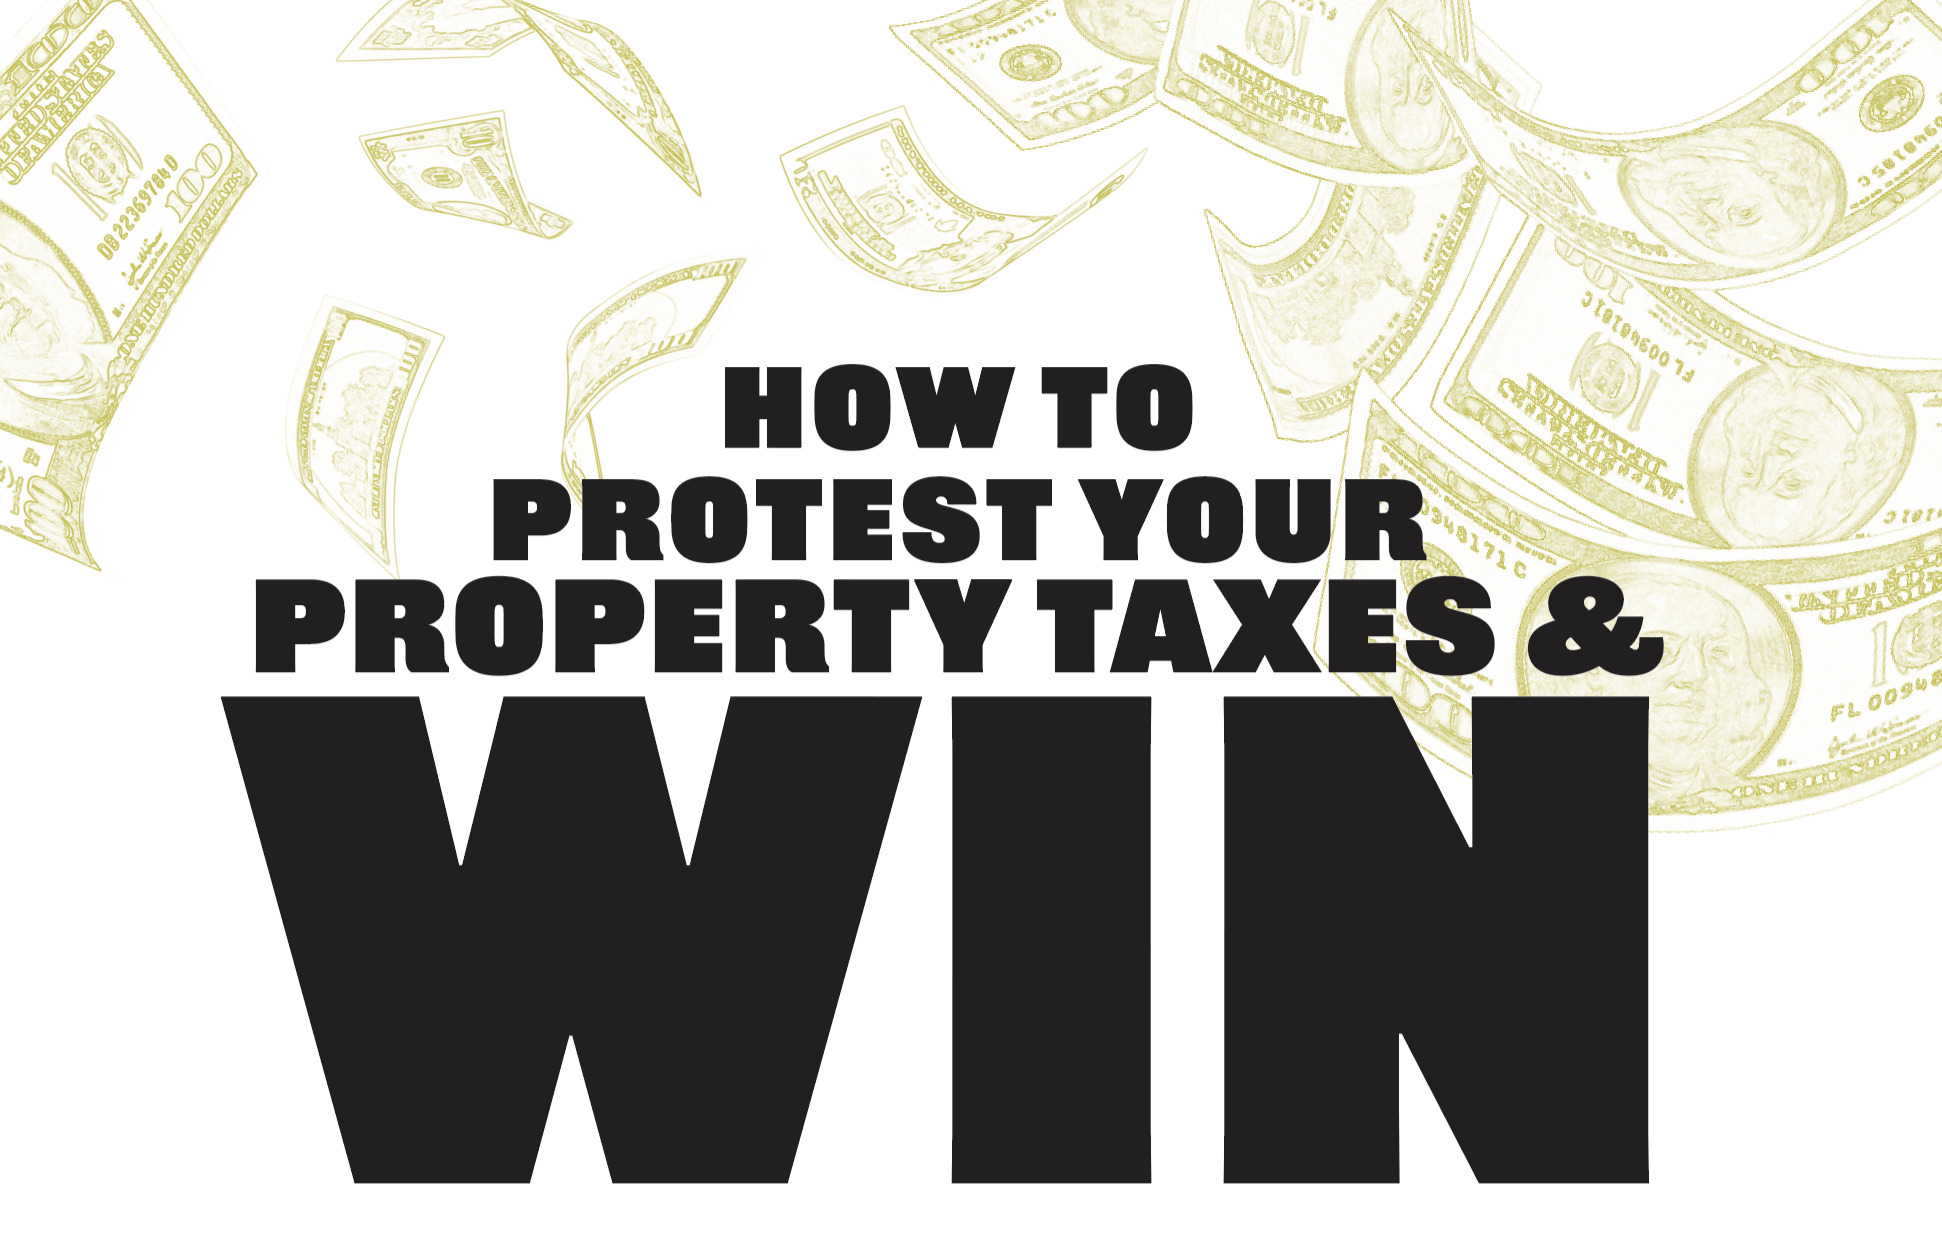 How to protest your property taxes & win